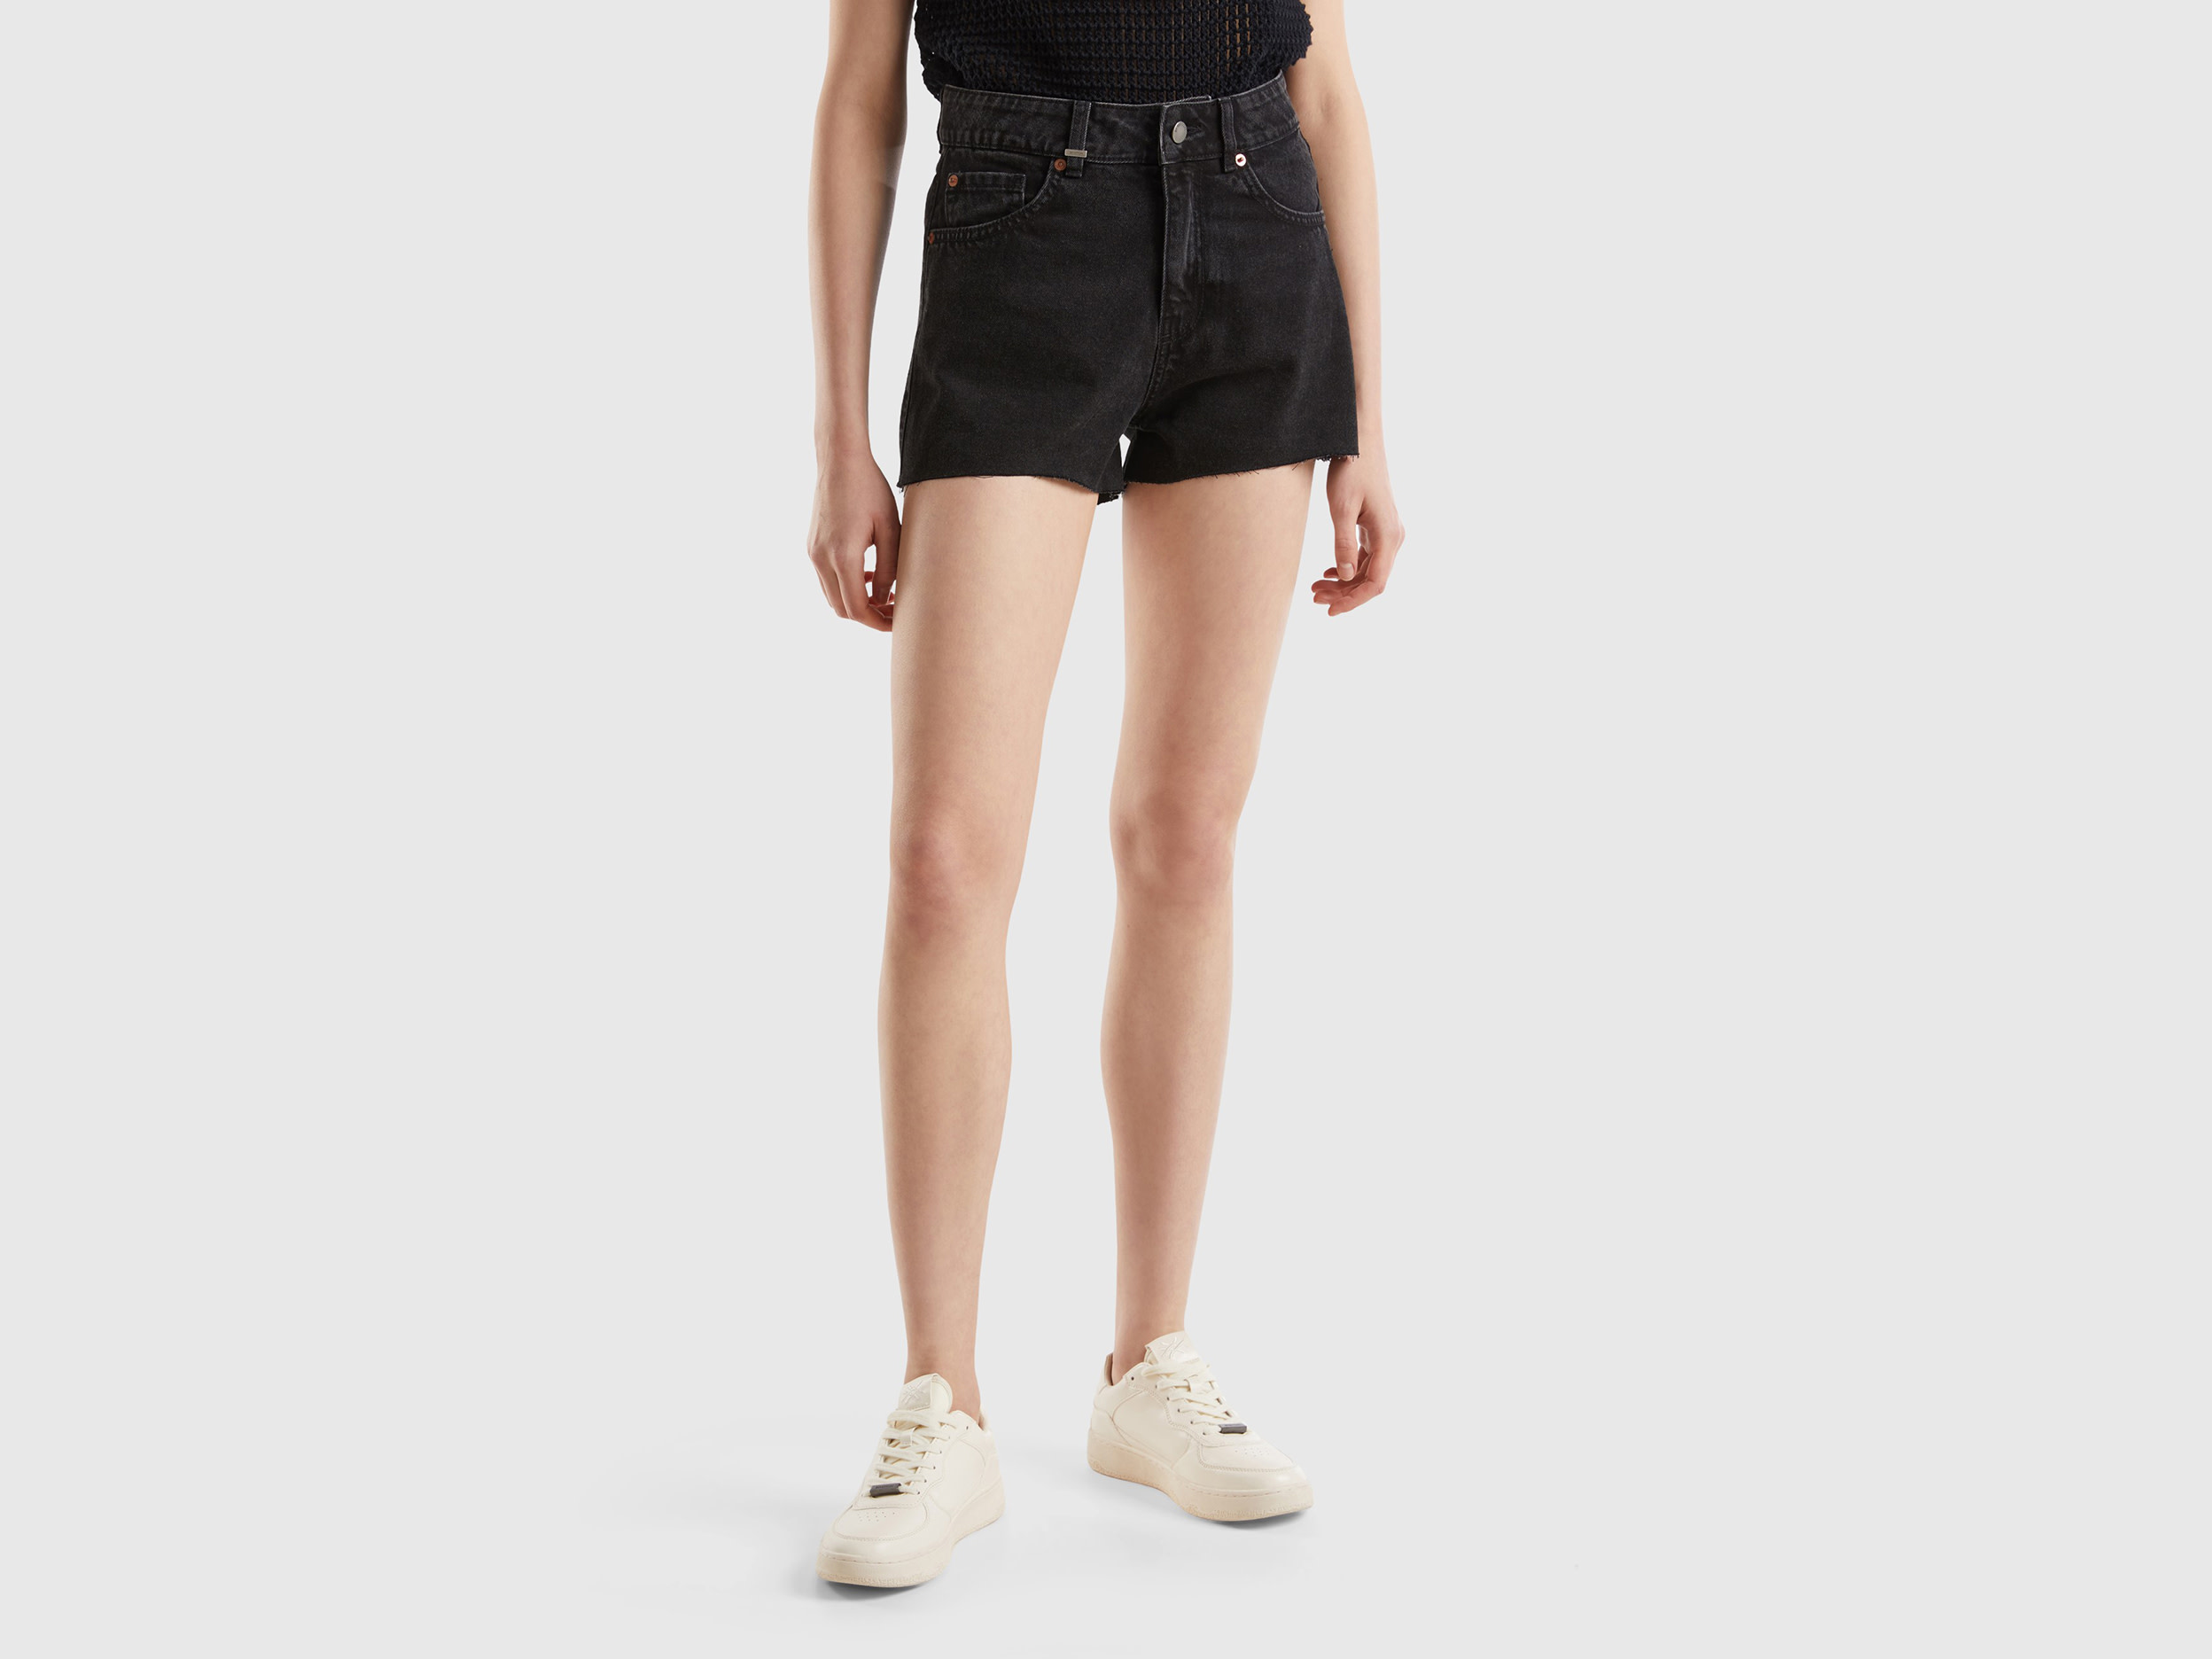 Image of Benetton, Frayed Shorts In Recycled Cotton Blend, size 28, Black, Women